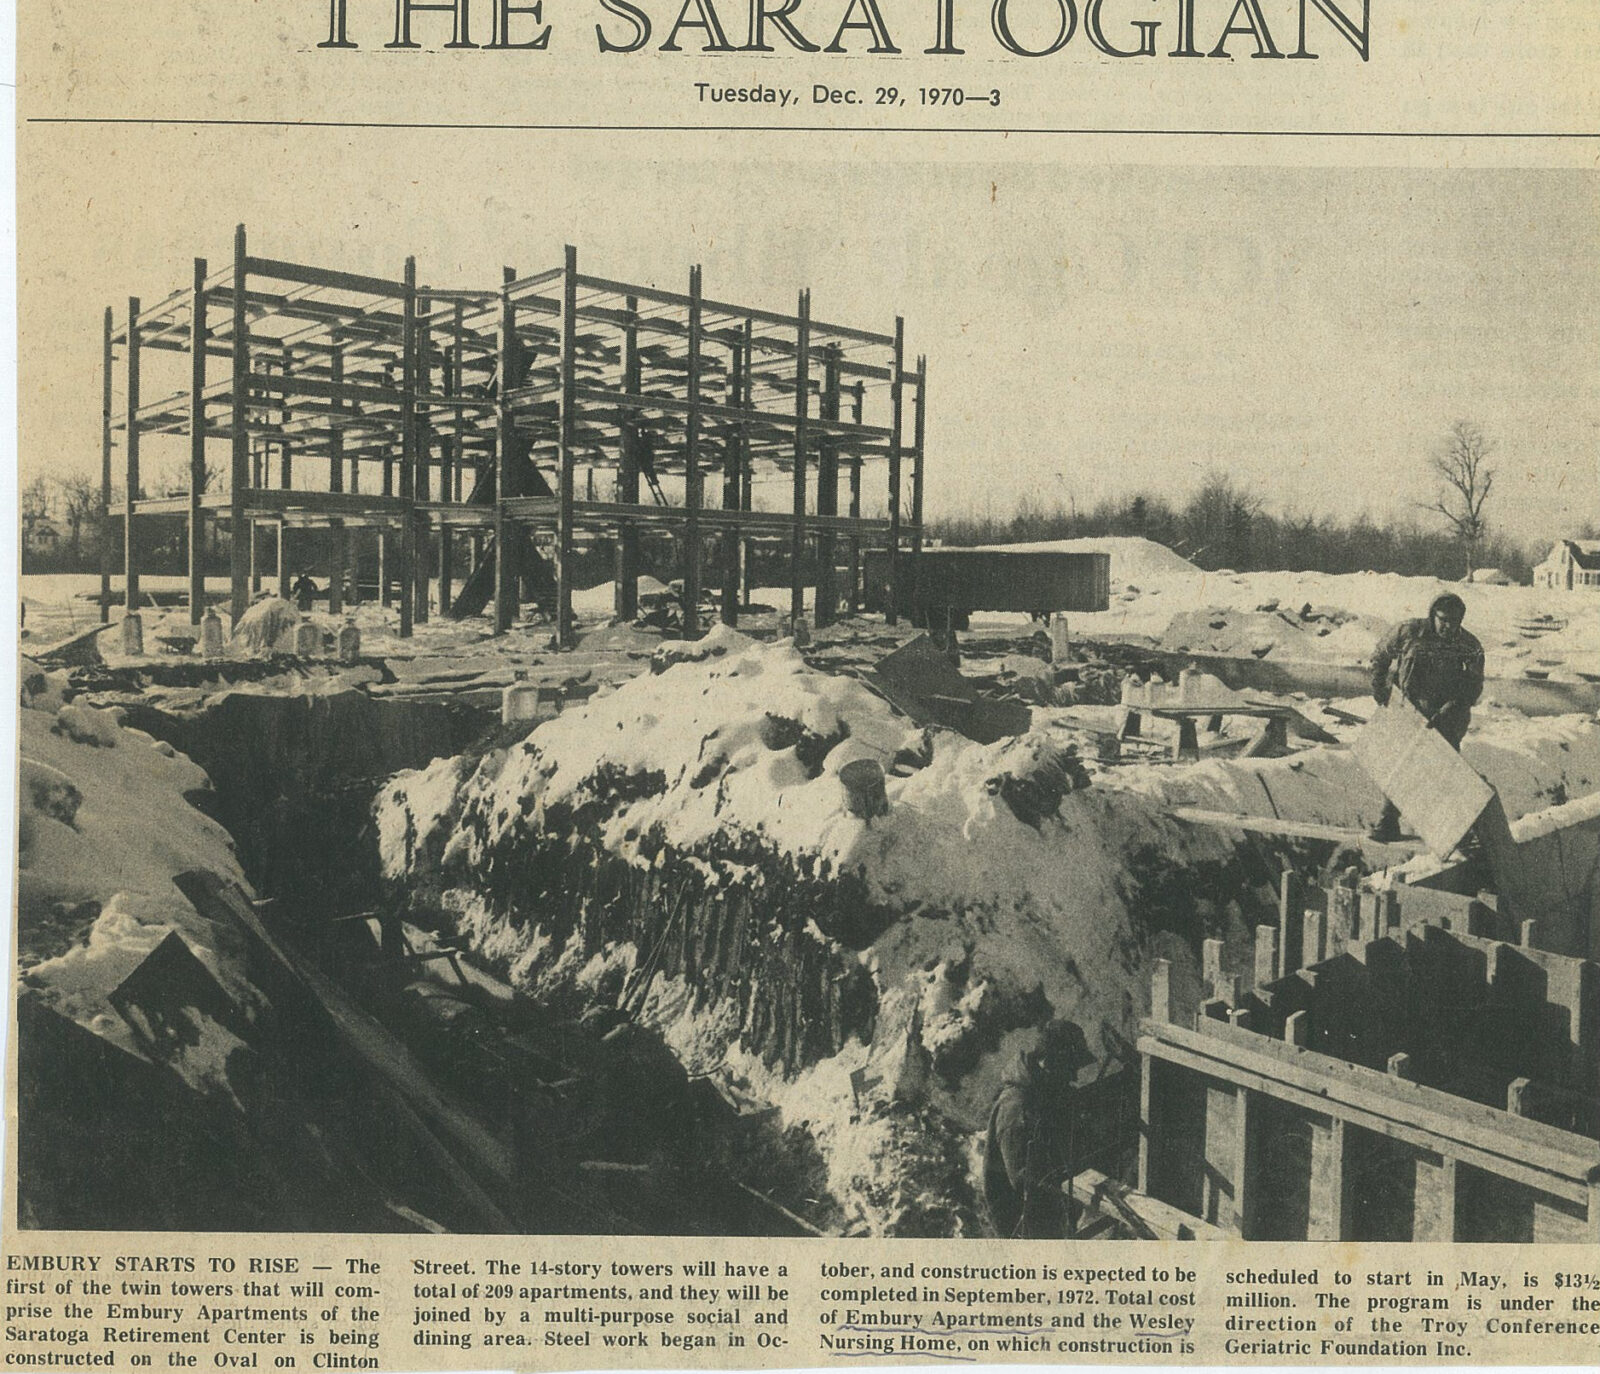 Photo of newspaper story in The Saratogian of Embury Apartments from December 29, 1970